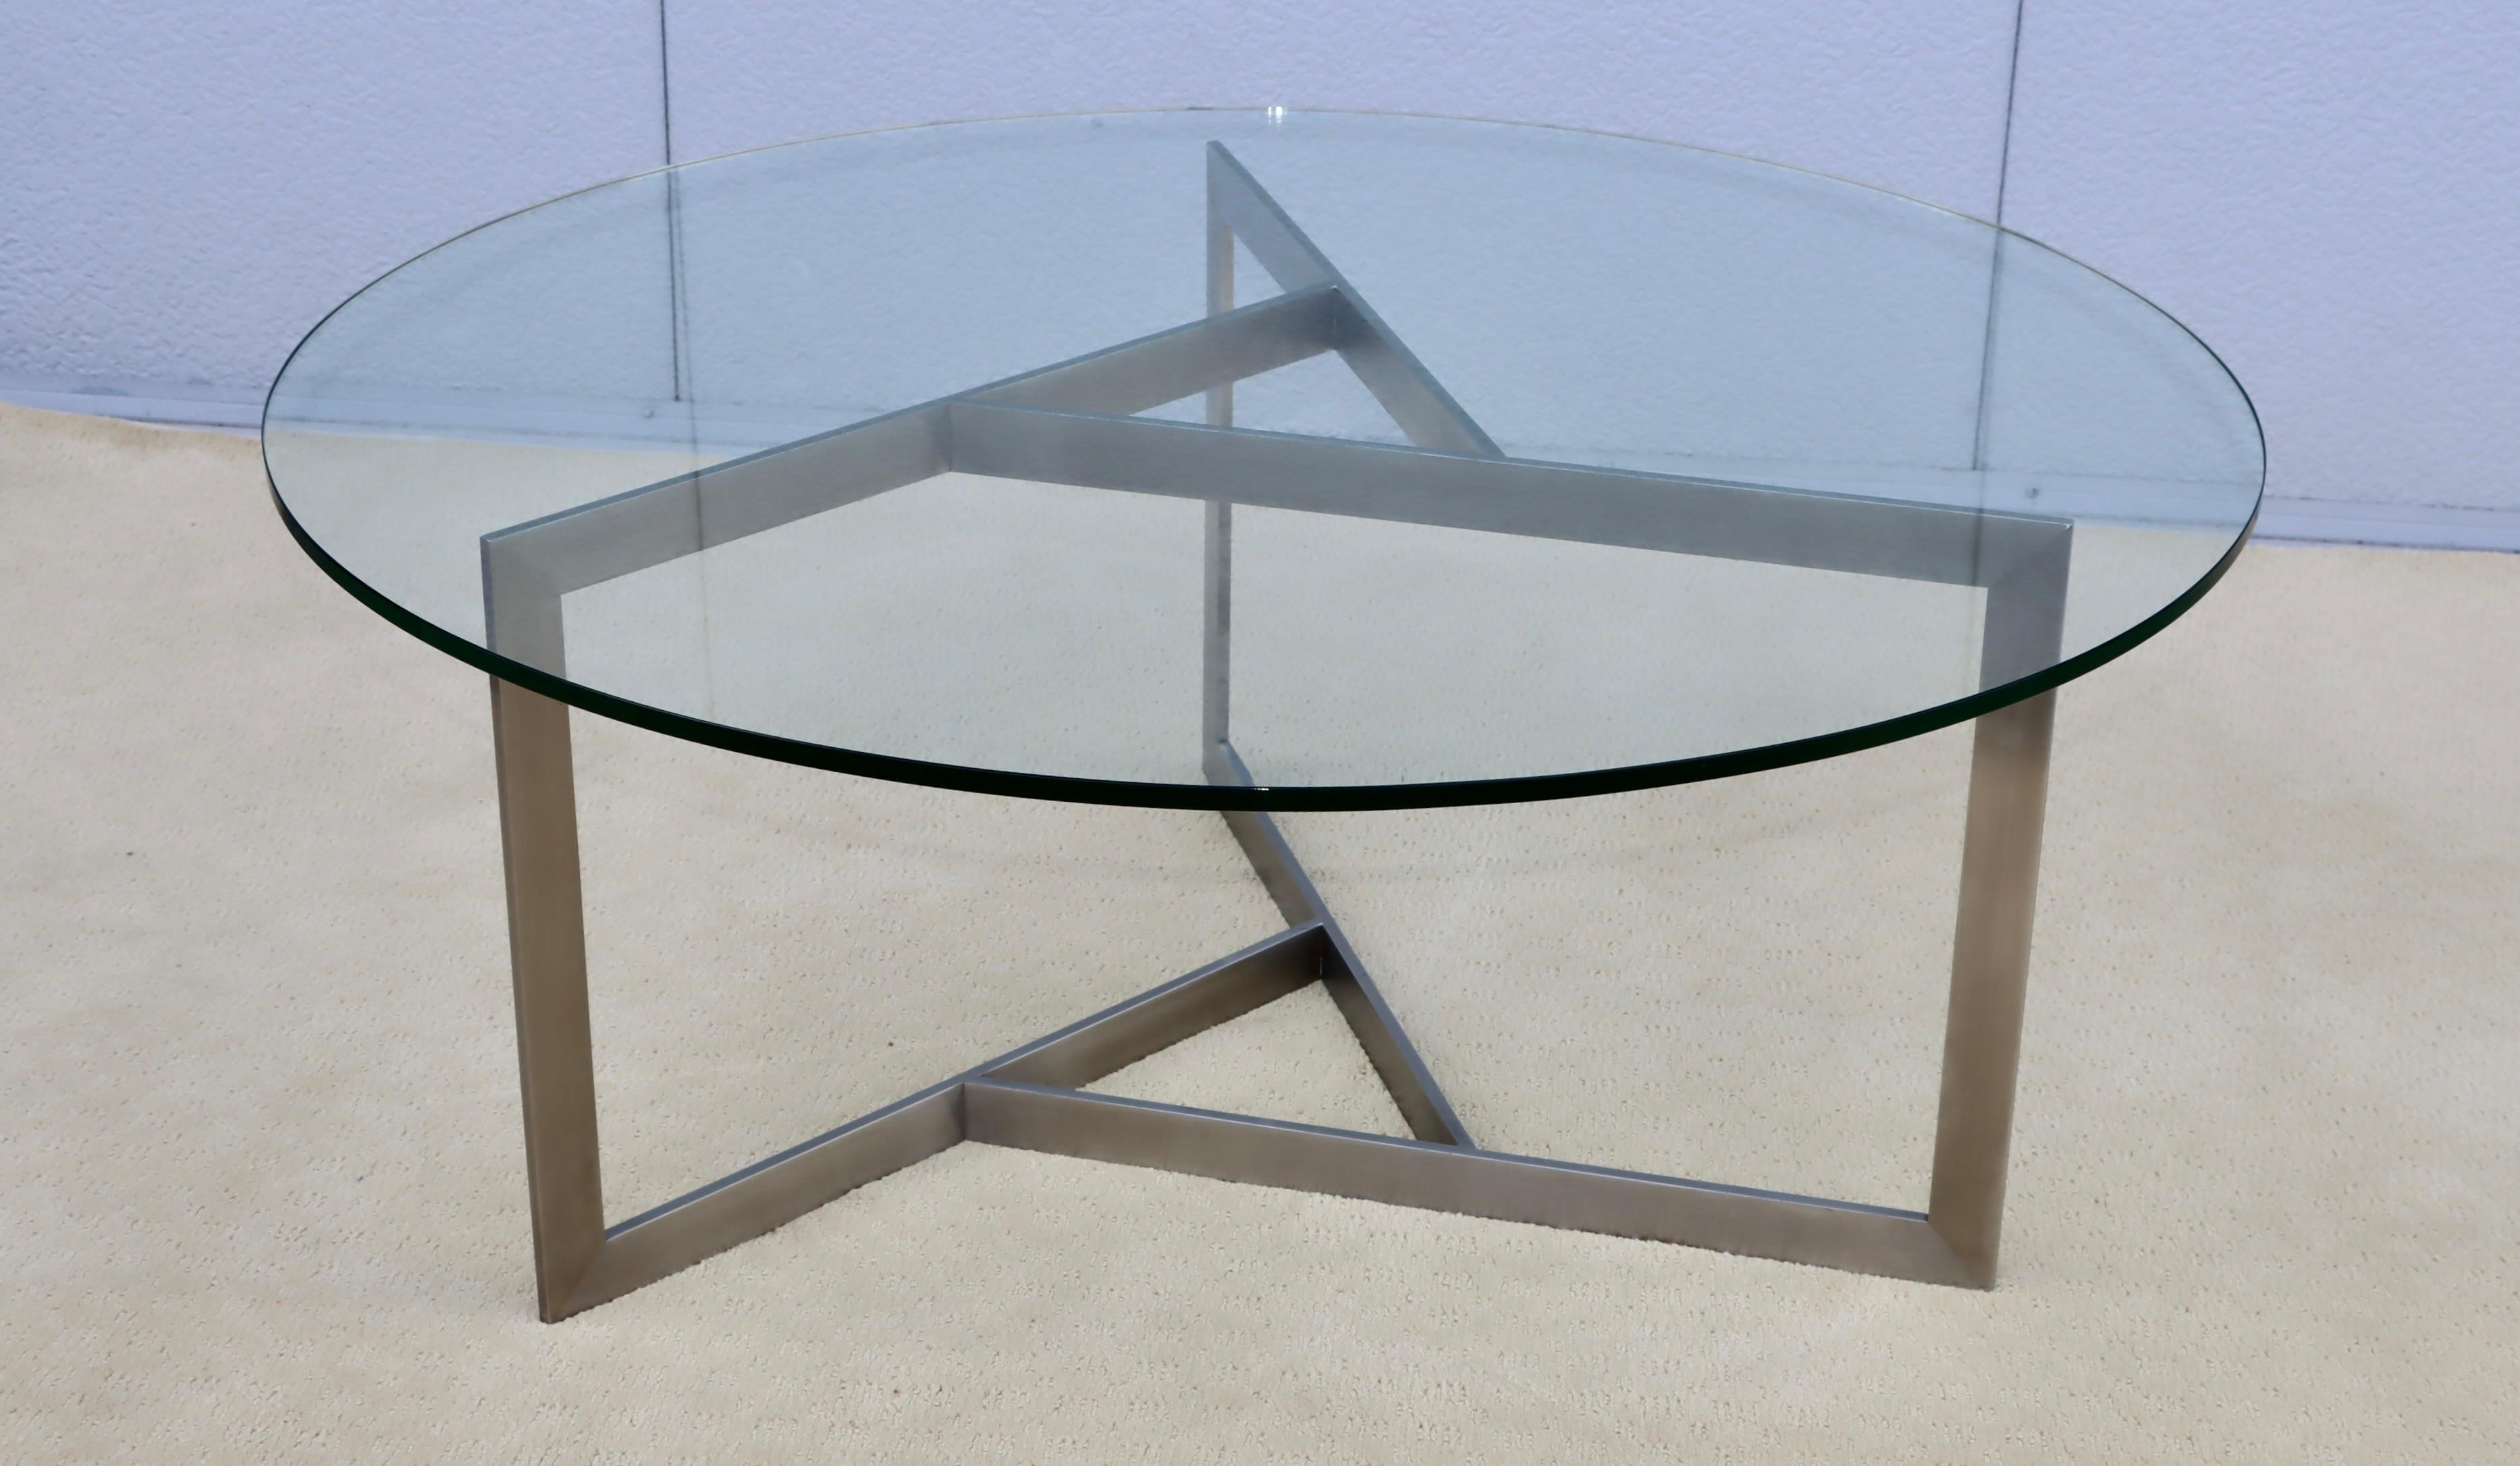 1970's Minimalist Stainless Steel With Round Glass Top Coffee Table In Good Condition For Sale In New York, NY